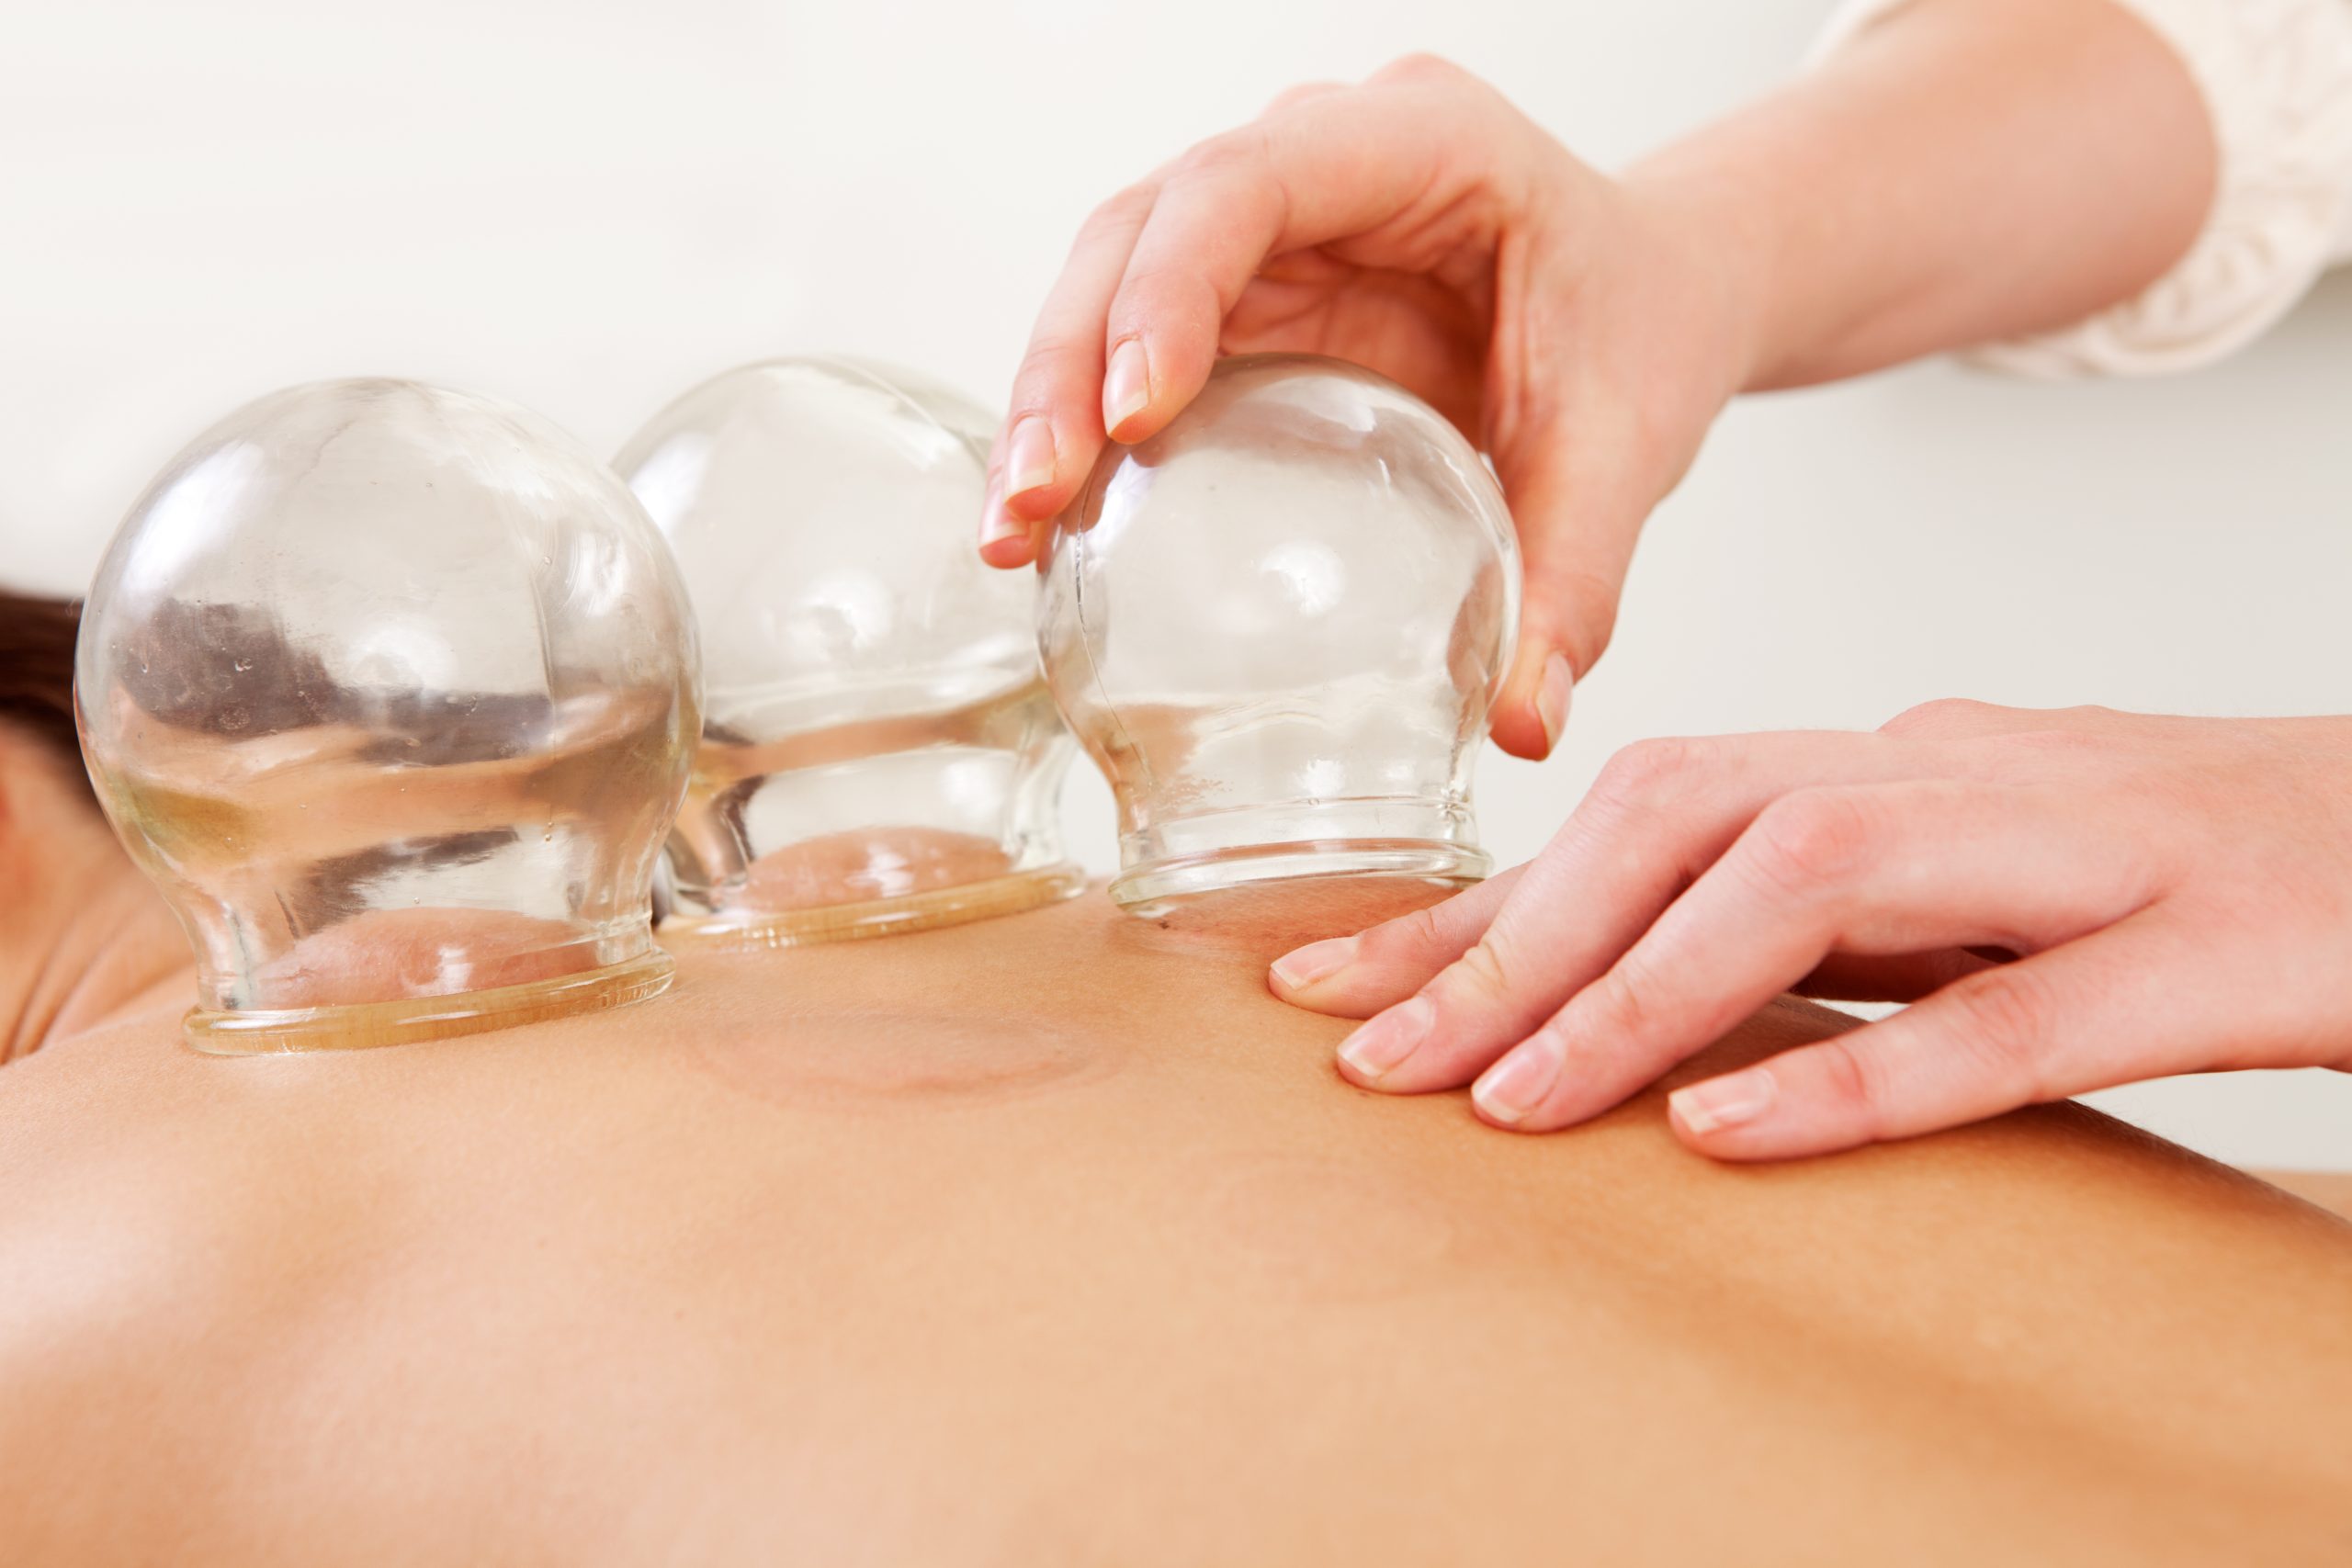 A person receiving cupping therapy, a practice from Chinese Medicine, on their back with a therapist's hands adjusting three glass cups.